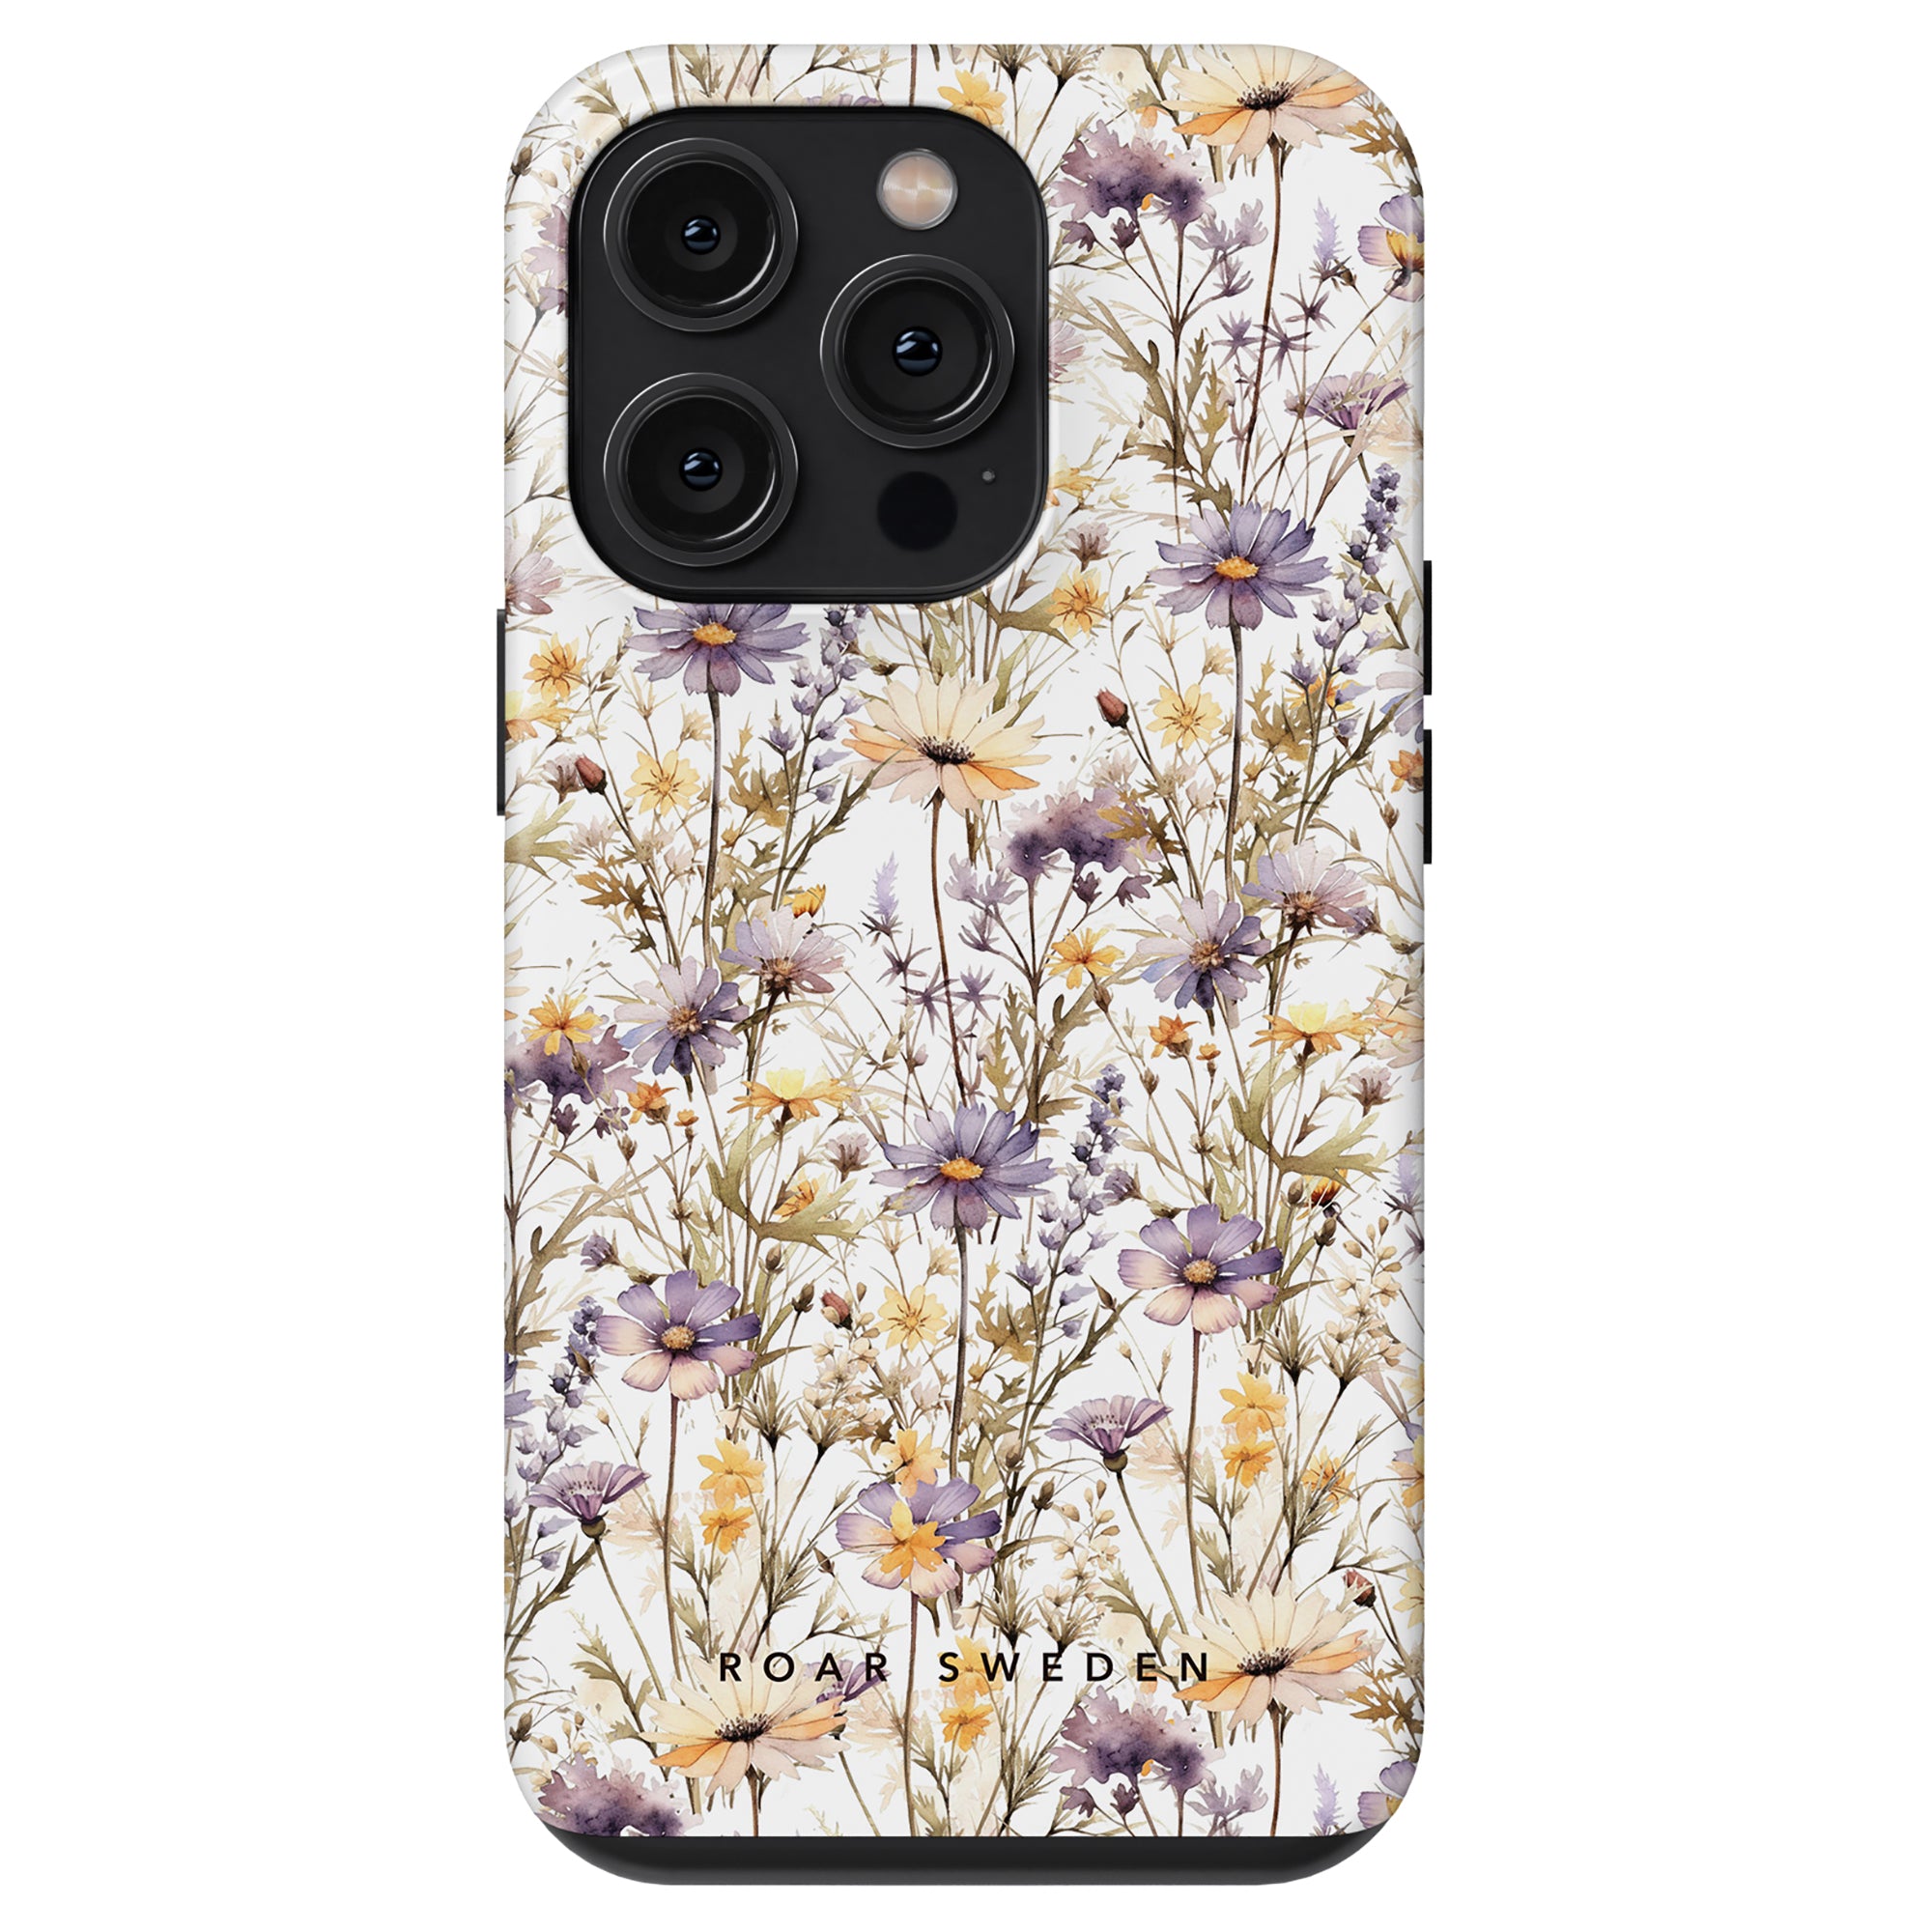 A Purple Wildflower - Tough Case with a floral-patterned design featuring purple, yellow, and white flowers from the Floral Collection, branded "Roar Sweden" at the bottom.